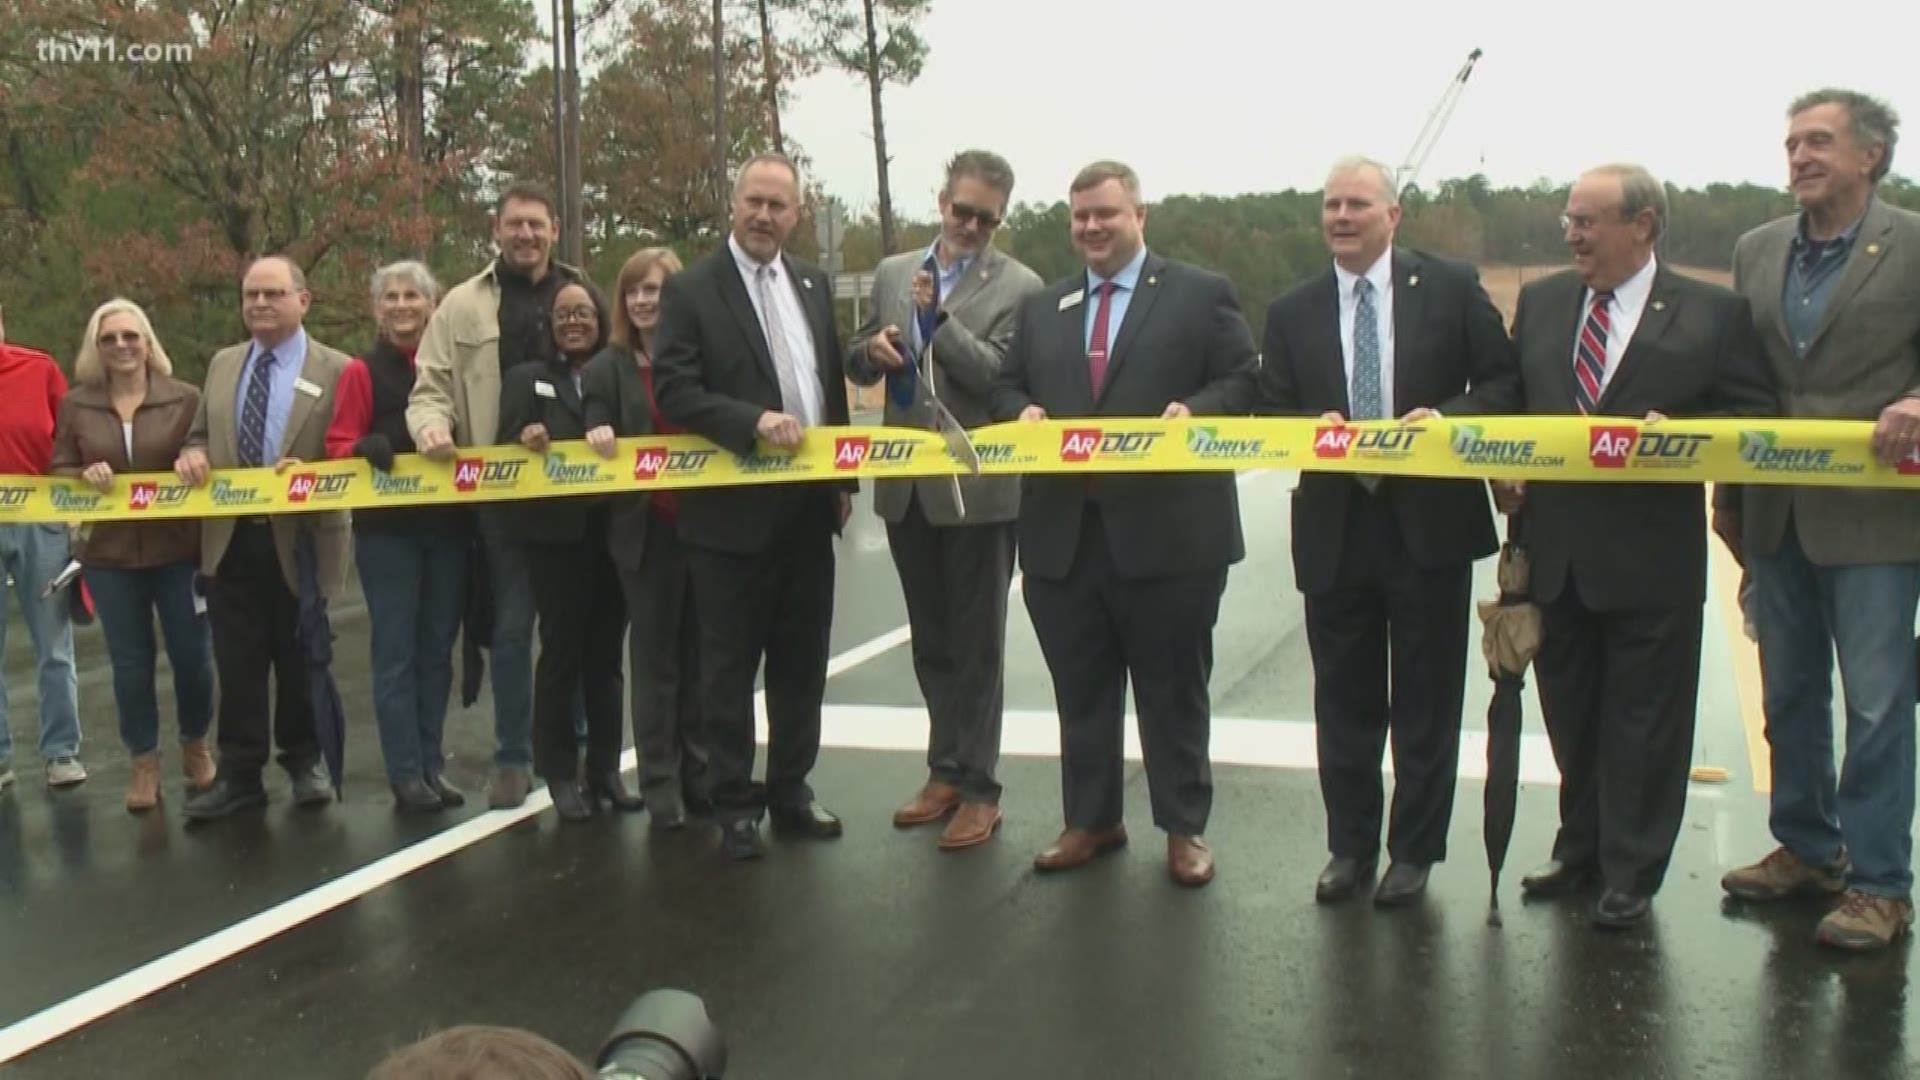 A troublesome traffic bottleneck is going away. There was a ribbon-cutting at the new Exit 146 in Maumelle today, although it didn't open as scheduled.